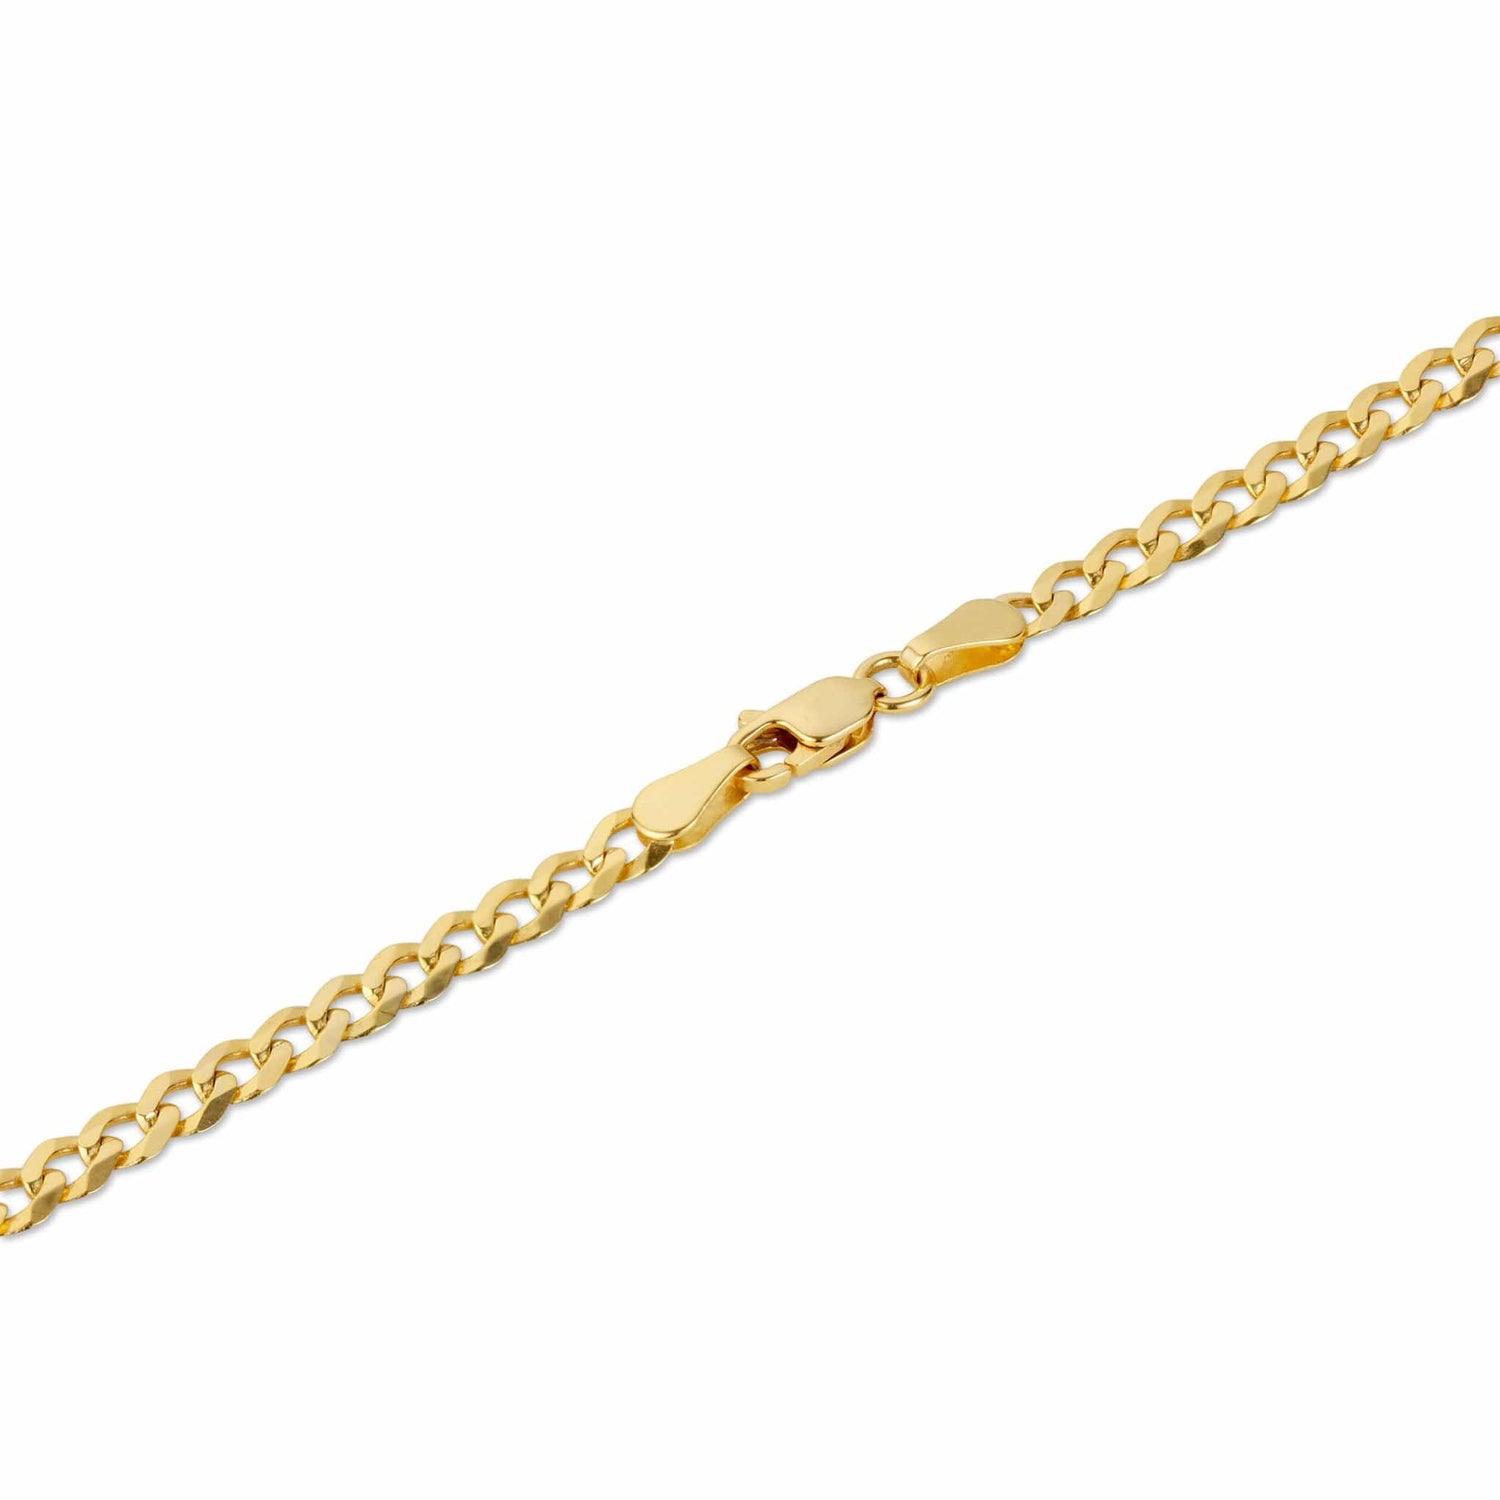 Yellow gold curb chain with a lobster claw clasp.